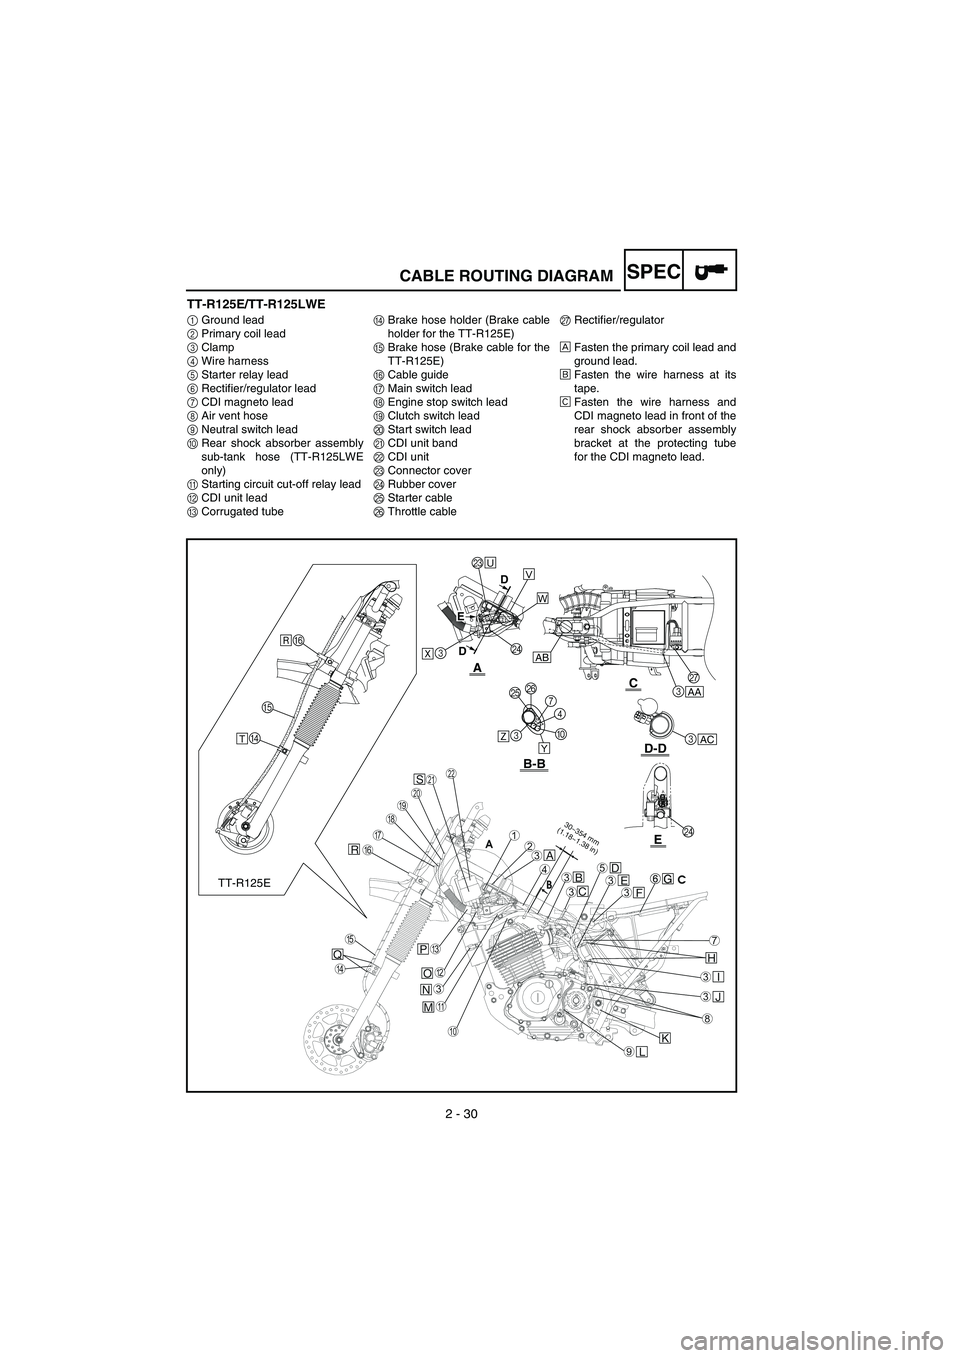 YAMAHA TTR125 2006  Owners Manual 6 - B - V
2 - 30
SPECCABLE ROUTING DIAGRAM
TT-R125E/TT-R125LWE
1Ground lead
2 Primary coil lead
3 Clamp
4 Wire harness
5 Starter relay lead
6 Rectifier/regulator lead
7 CDI magneto lead
8 Air vent hos